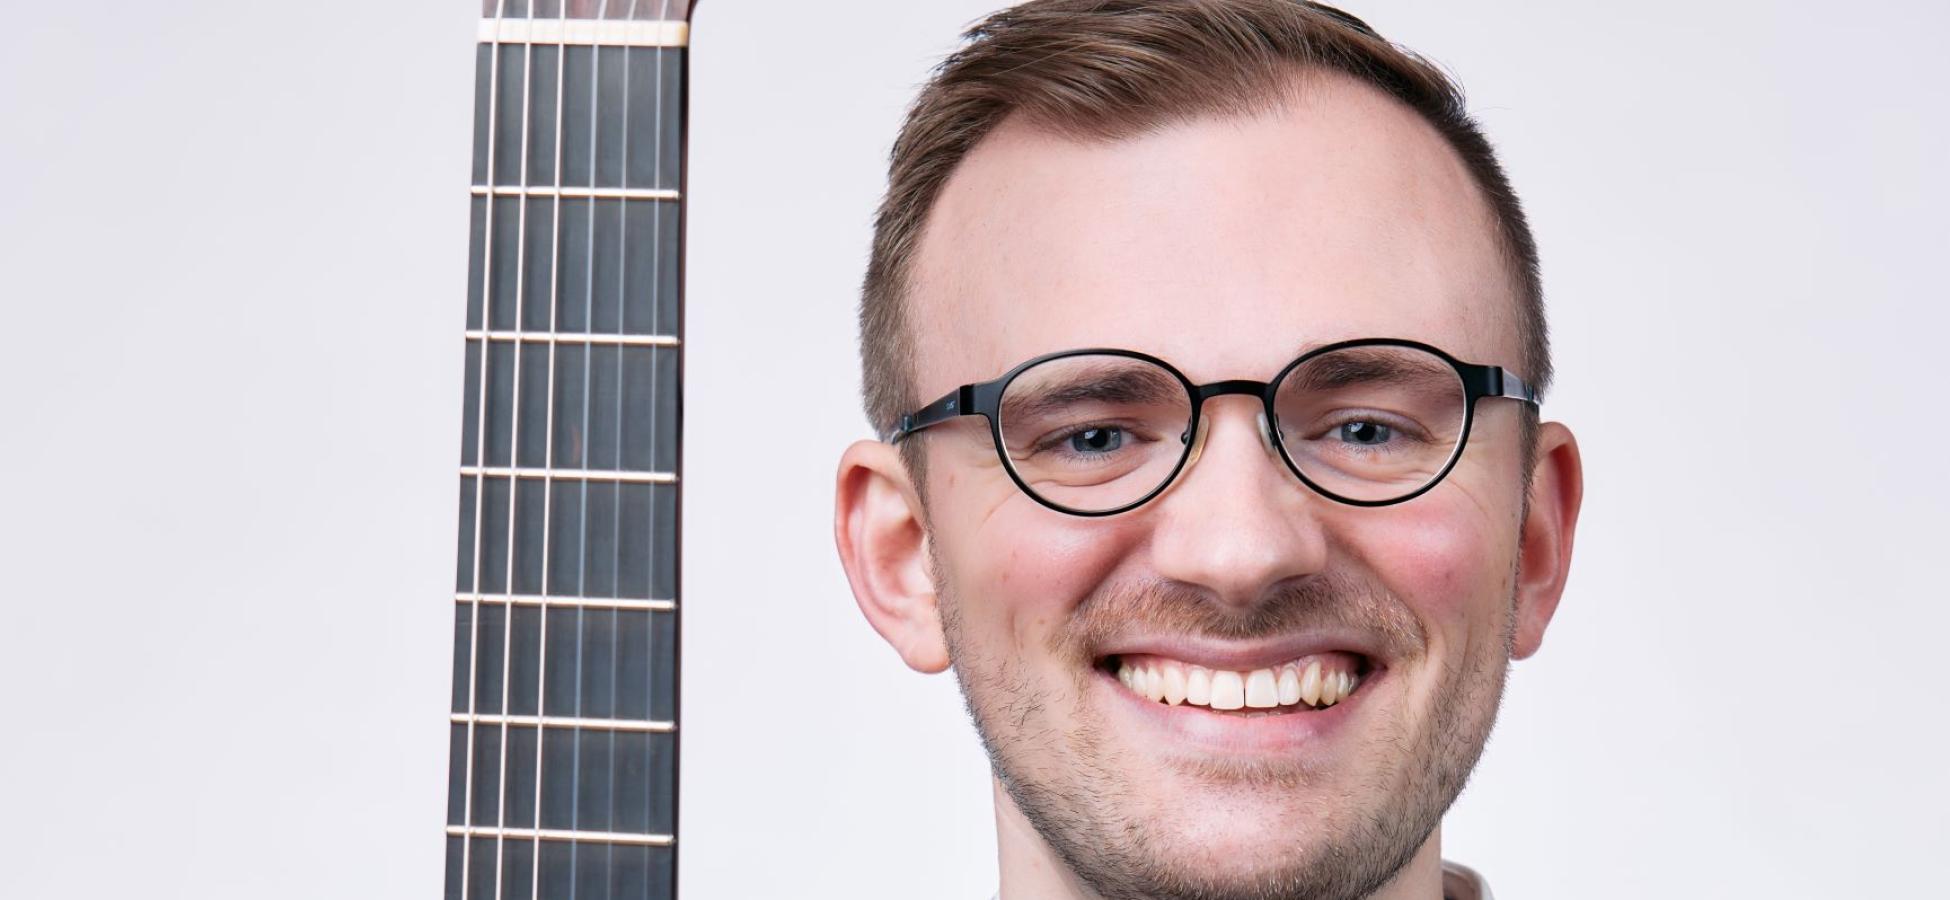 a person smiling holding a guitar